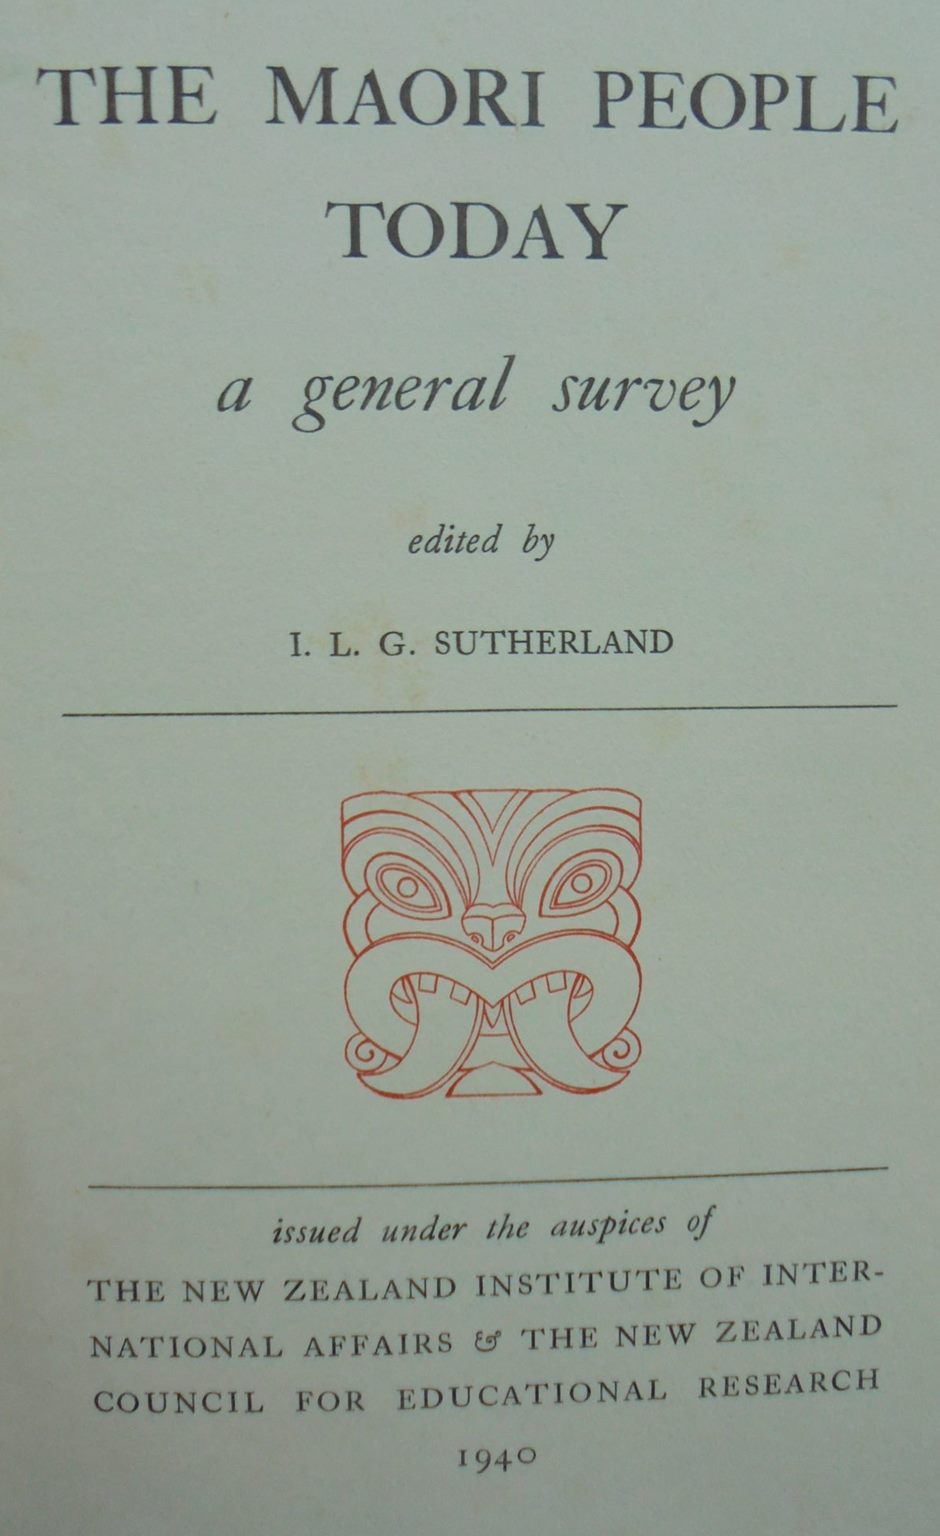 The Maori People Today A General Survey by I.L.G. Sutherland (editor).